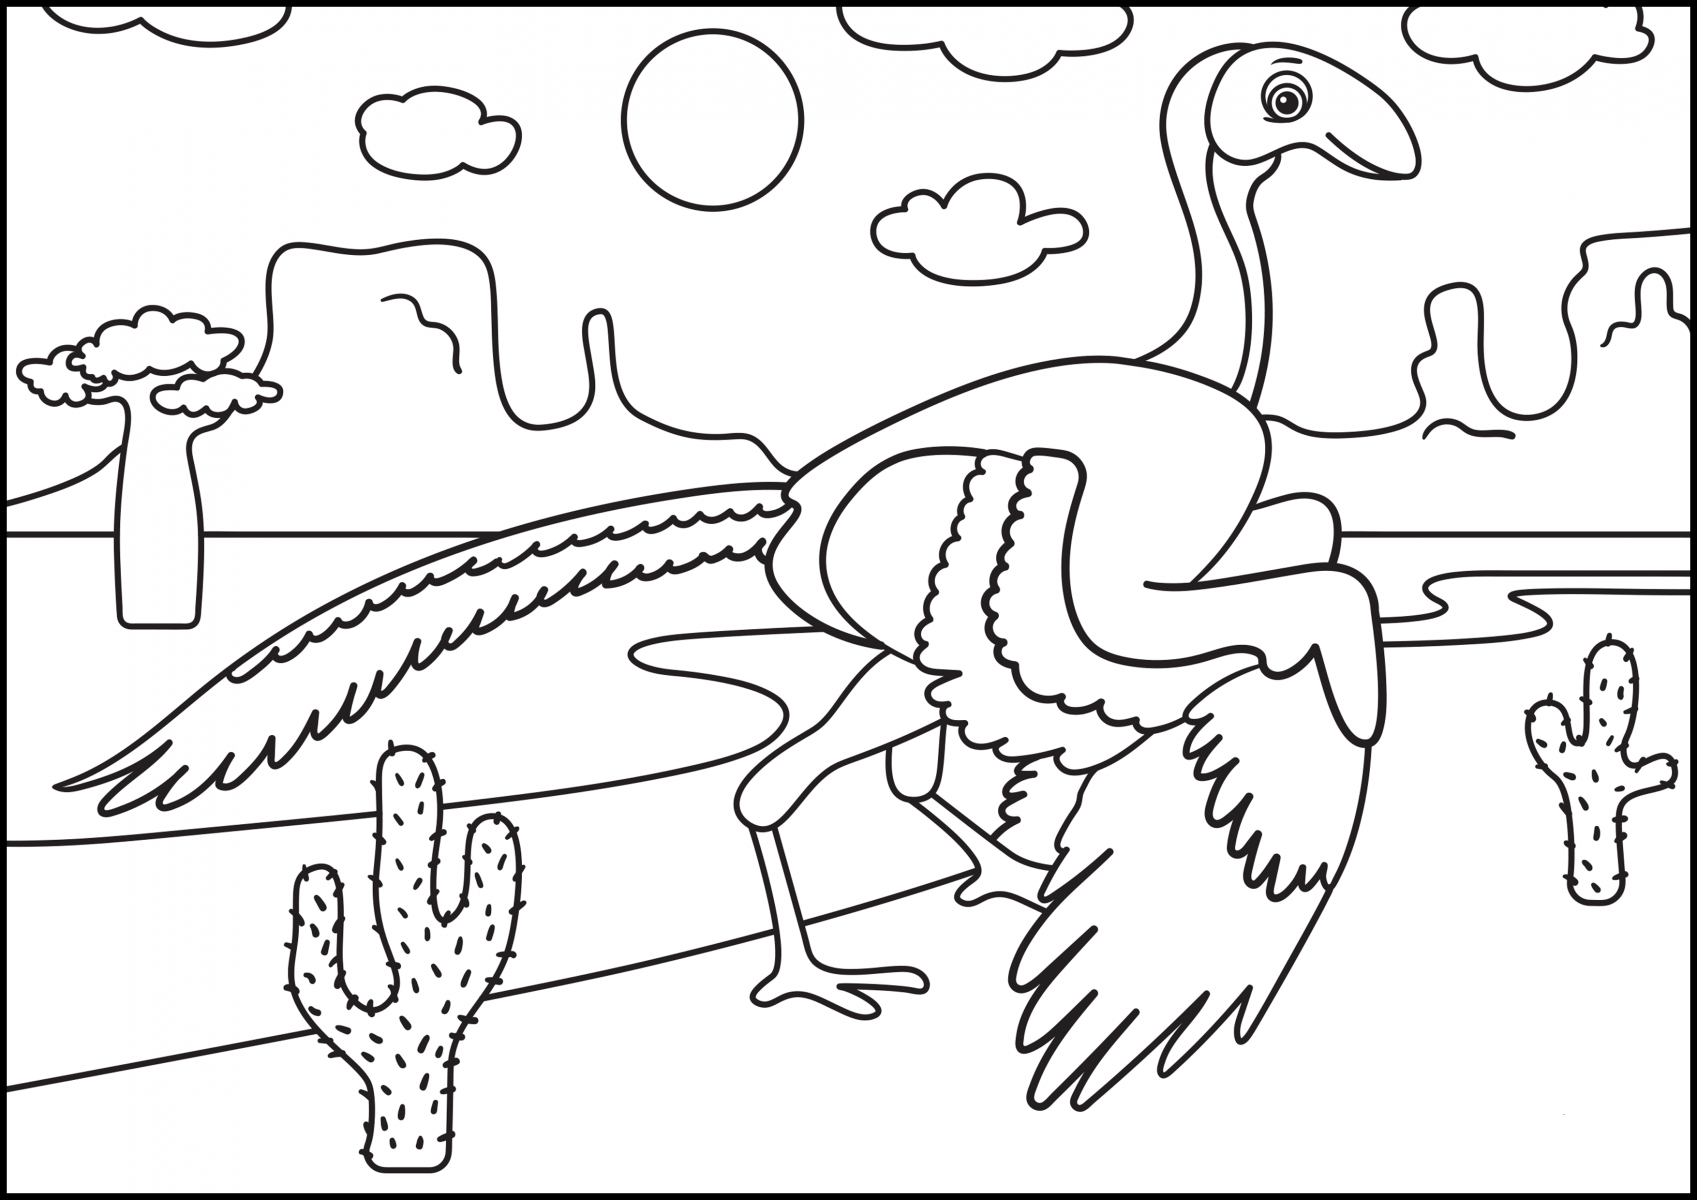 microraptor coloring pages for kids